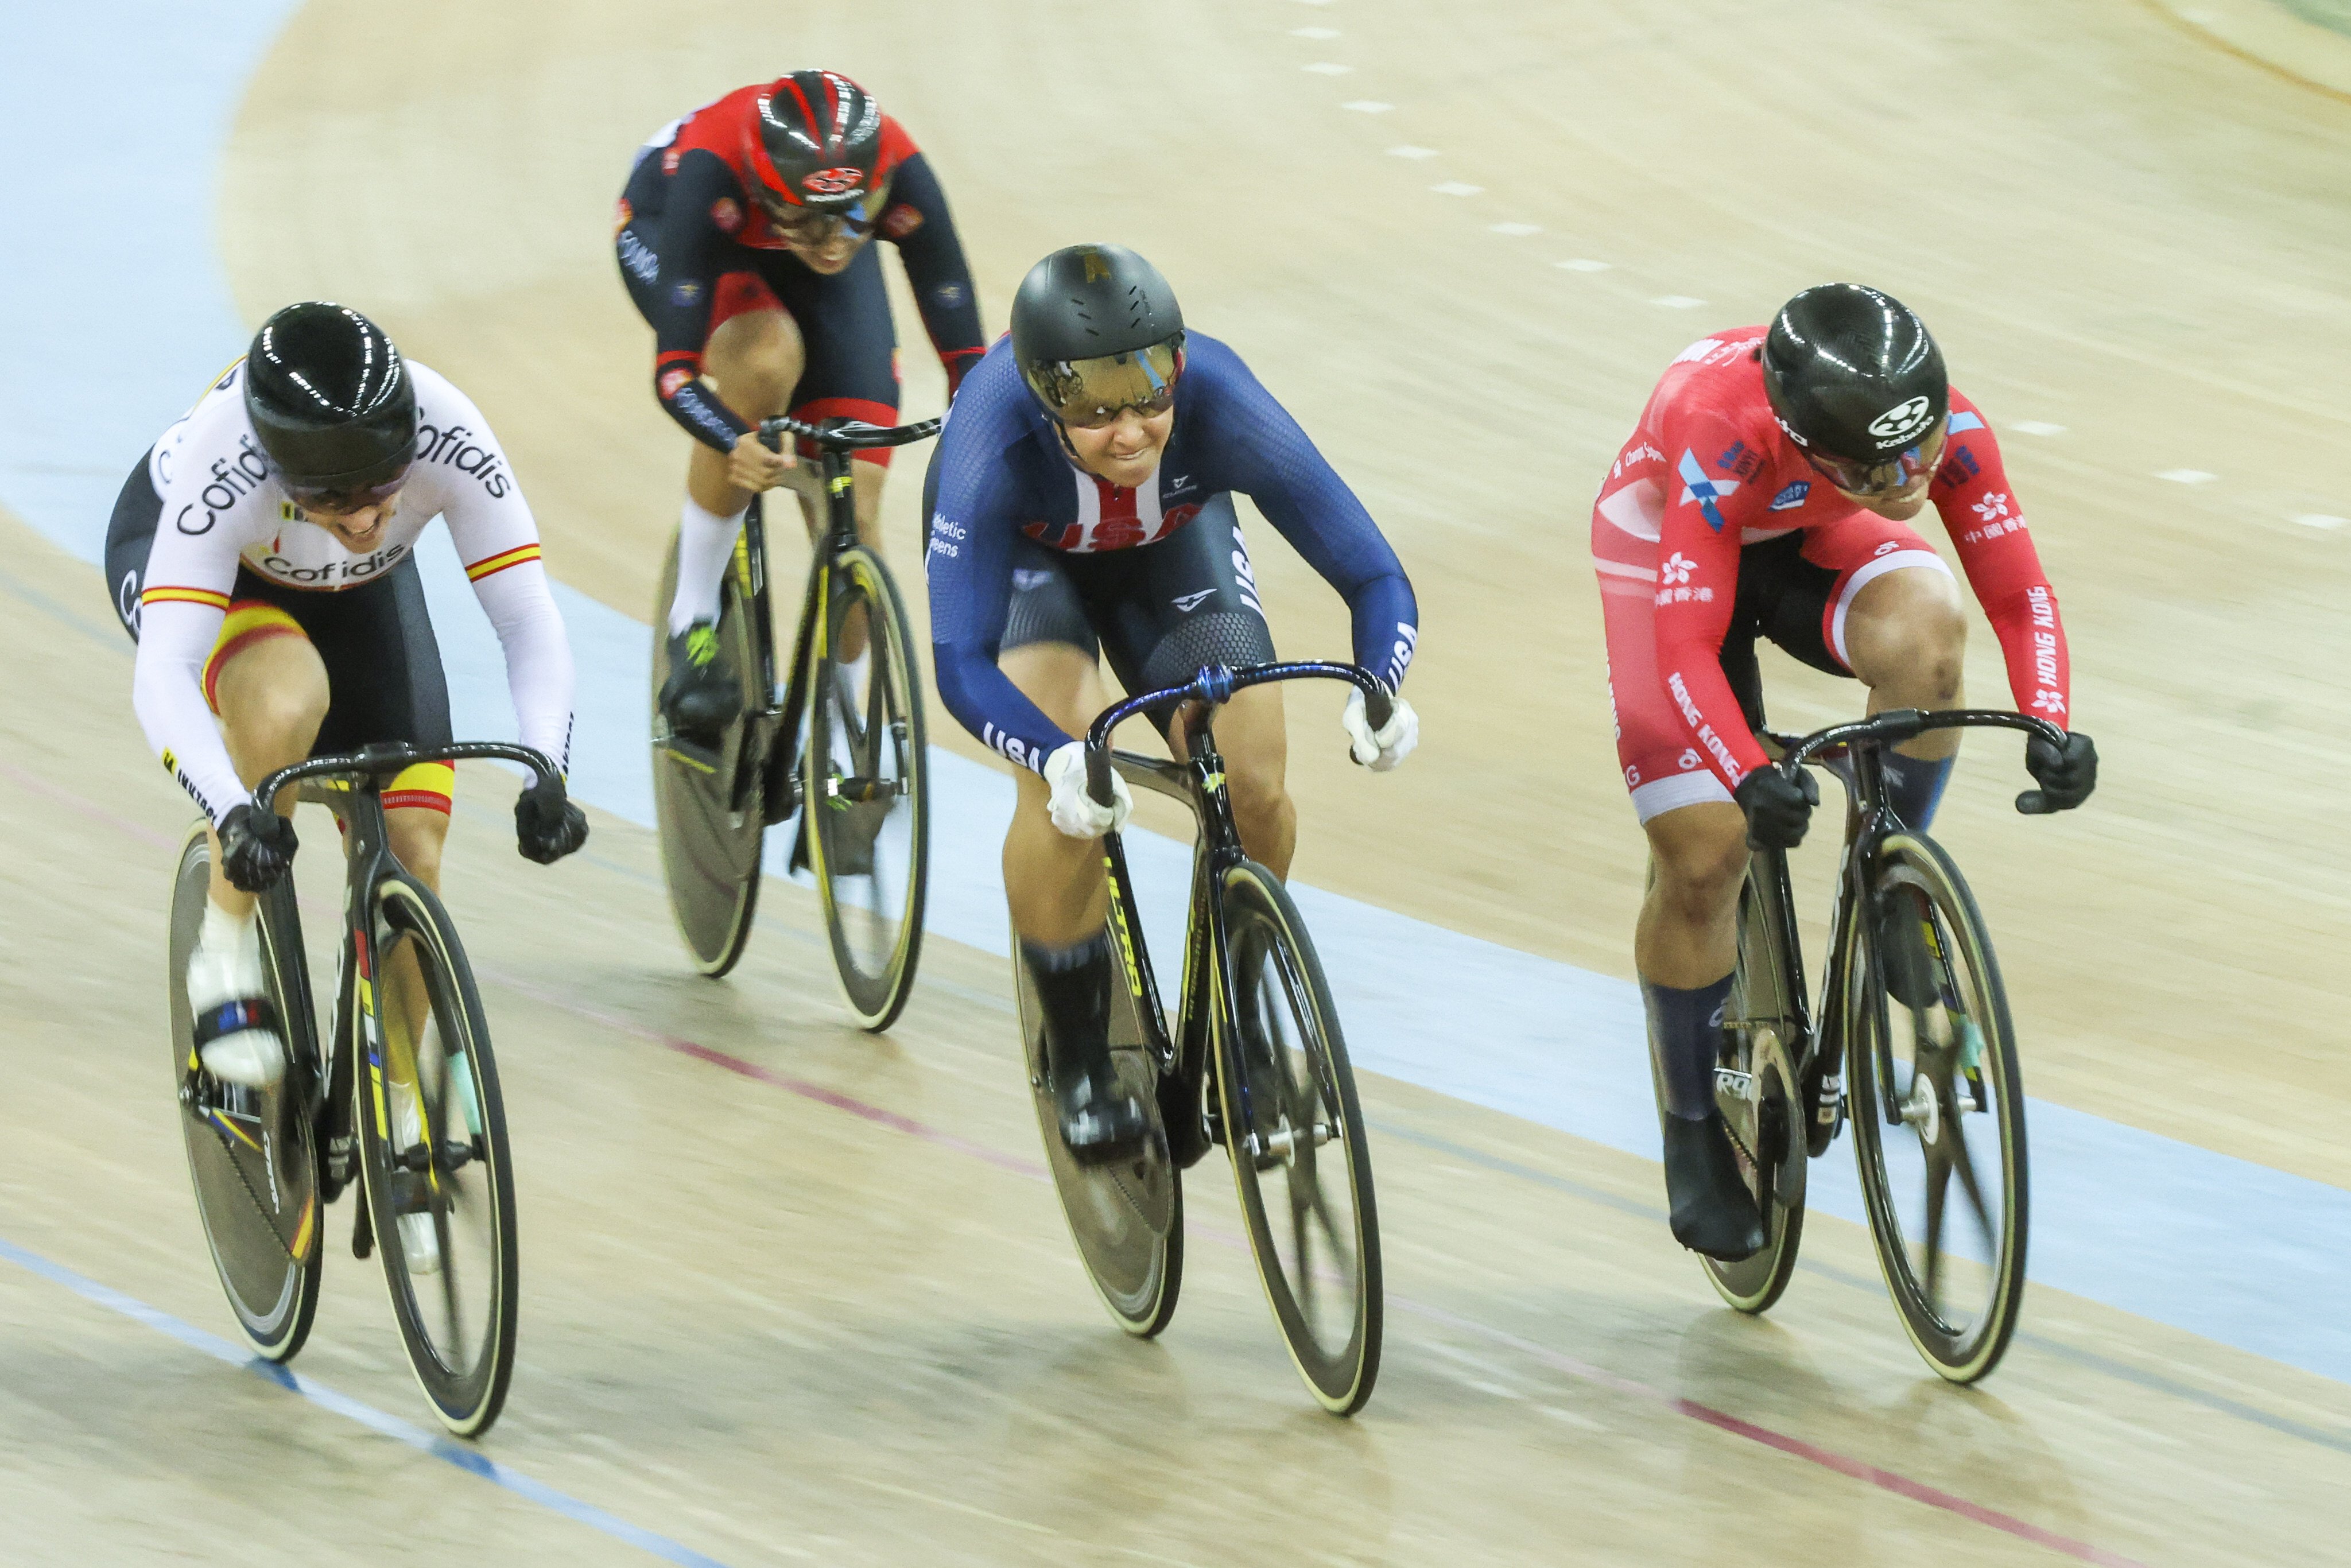 Jessica Lee (right) represents Hong Kong at the 2021 Nations Cup at the Tseung Kwan O velodrome. The 31-year-old decides to call it a day in professional career. Photo: May Tse